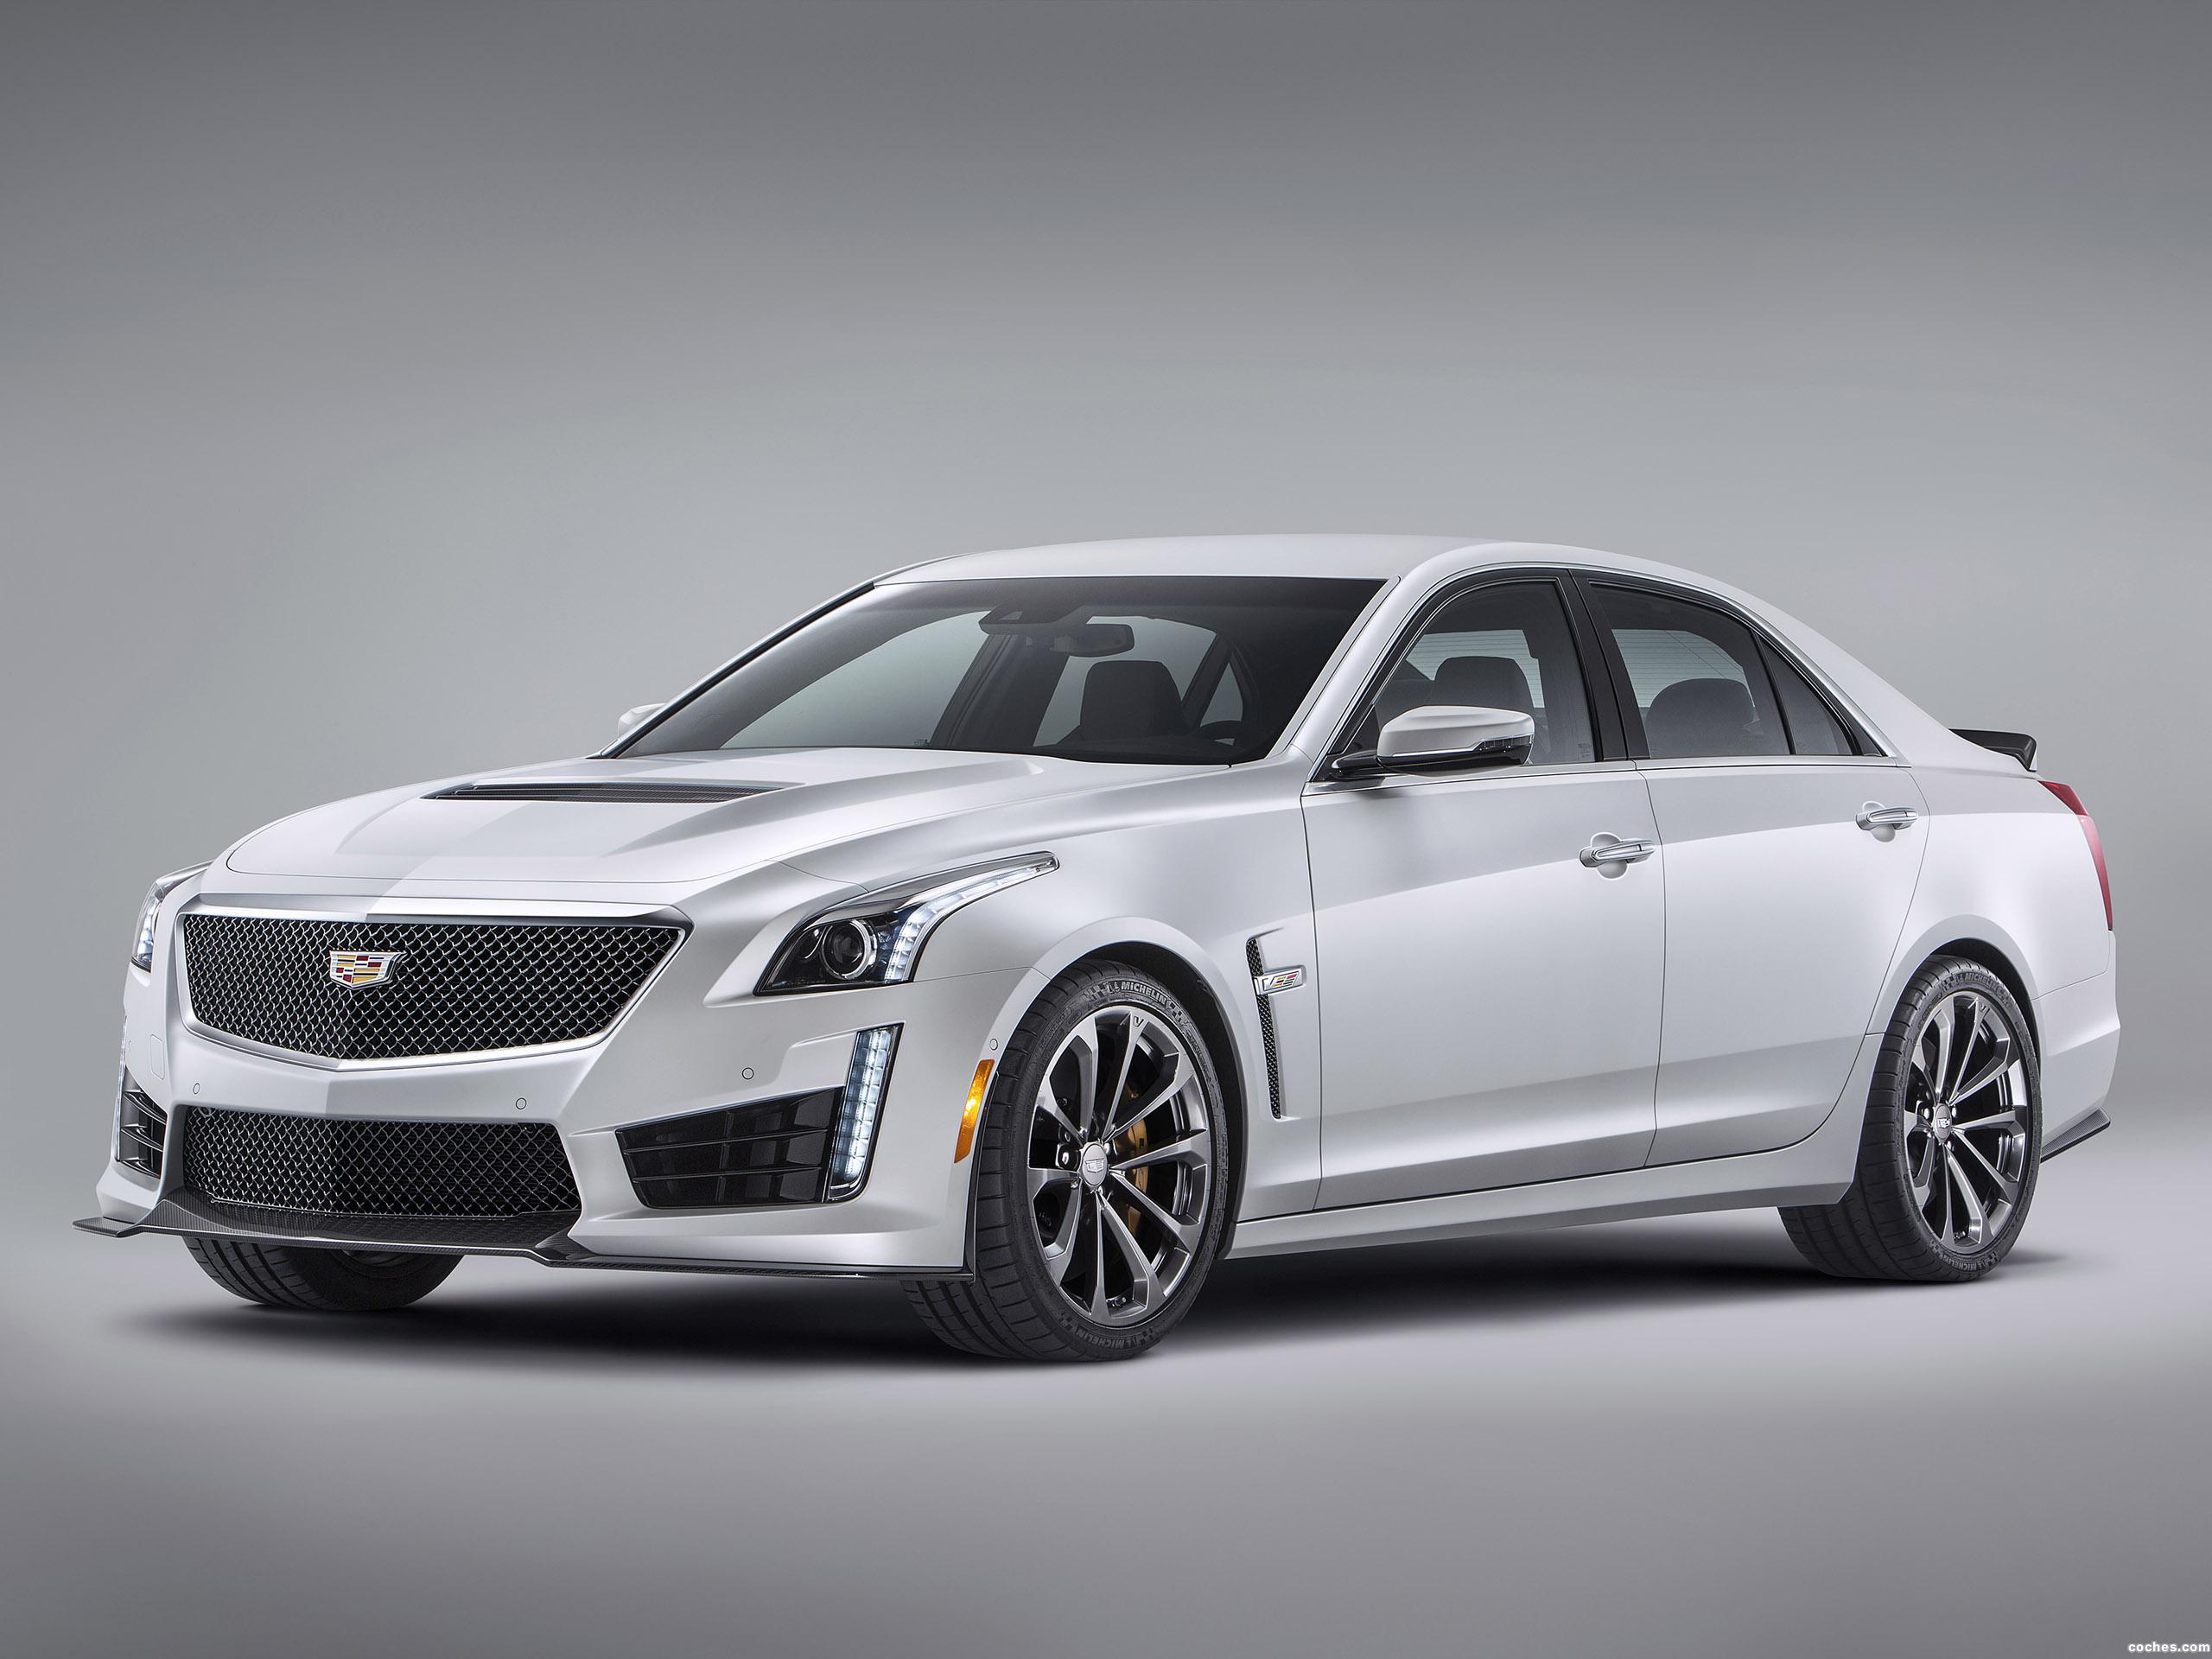 How much hp does a cts v have